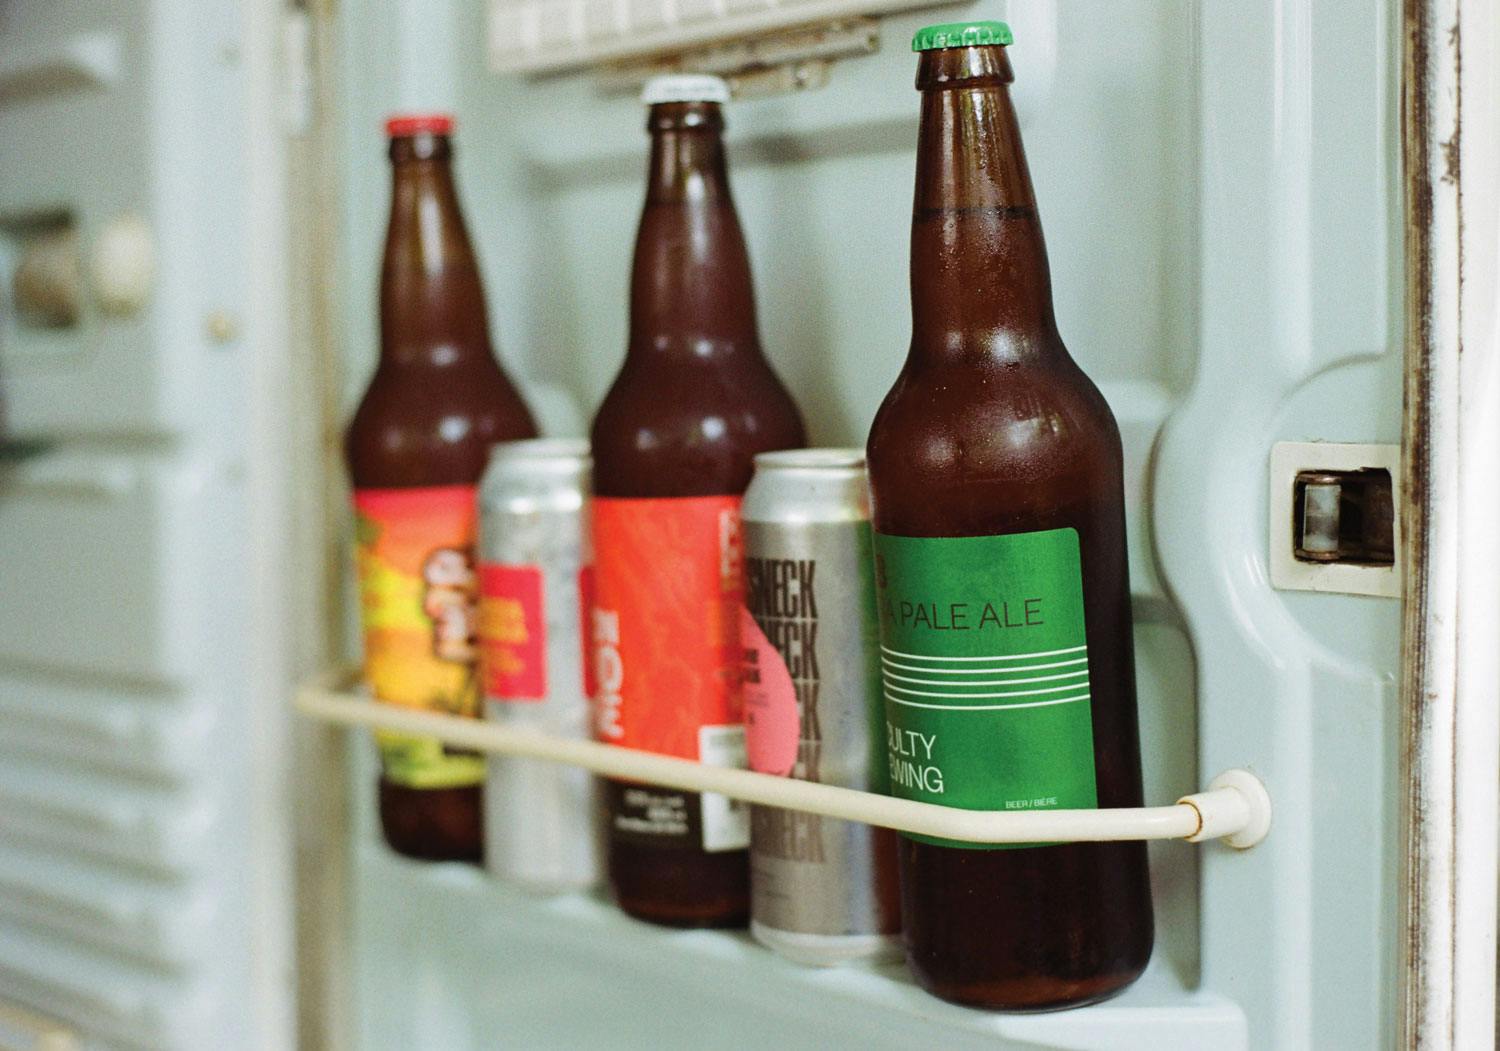 A fridge door shelf holding three large, brown glass bottles of beer, staggered with two tall beer cans.